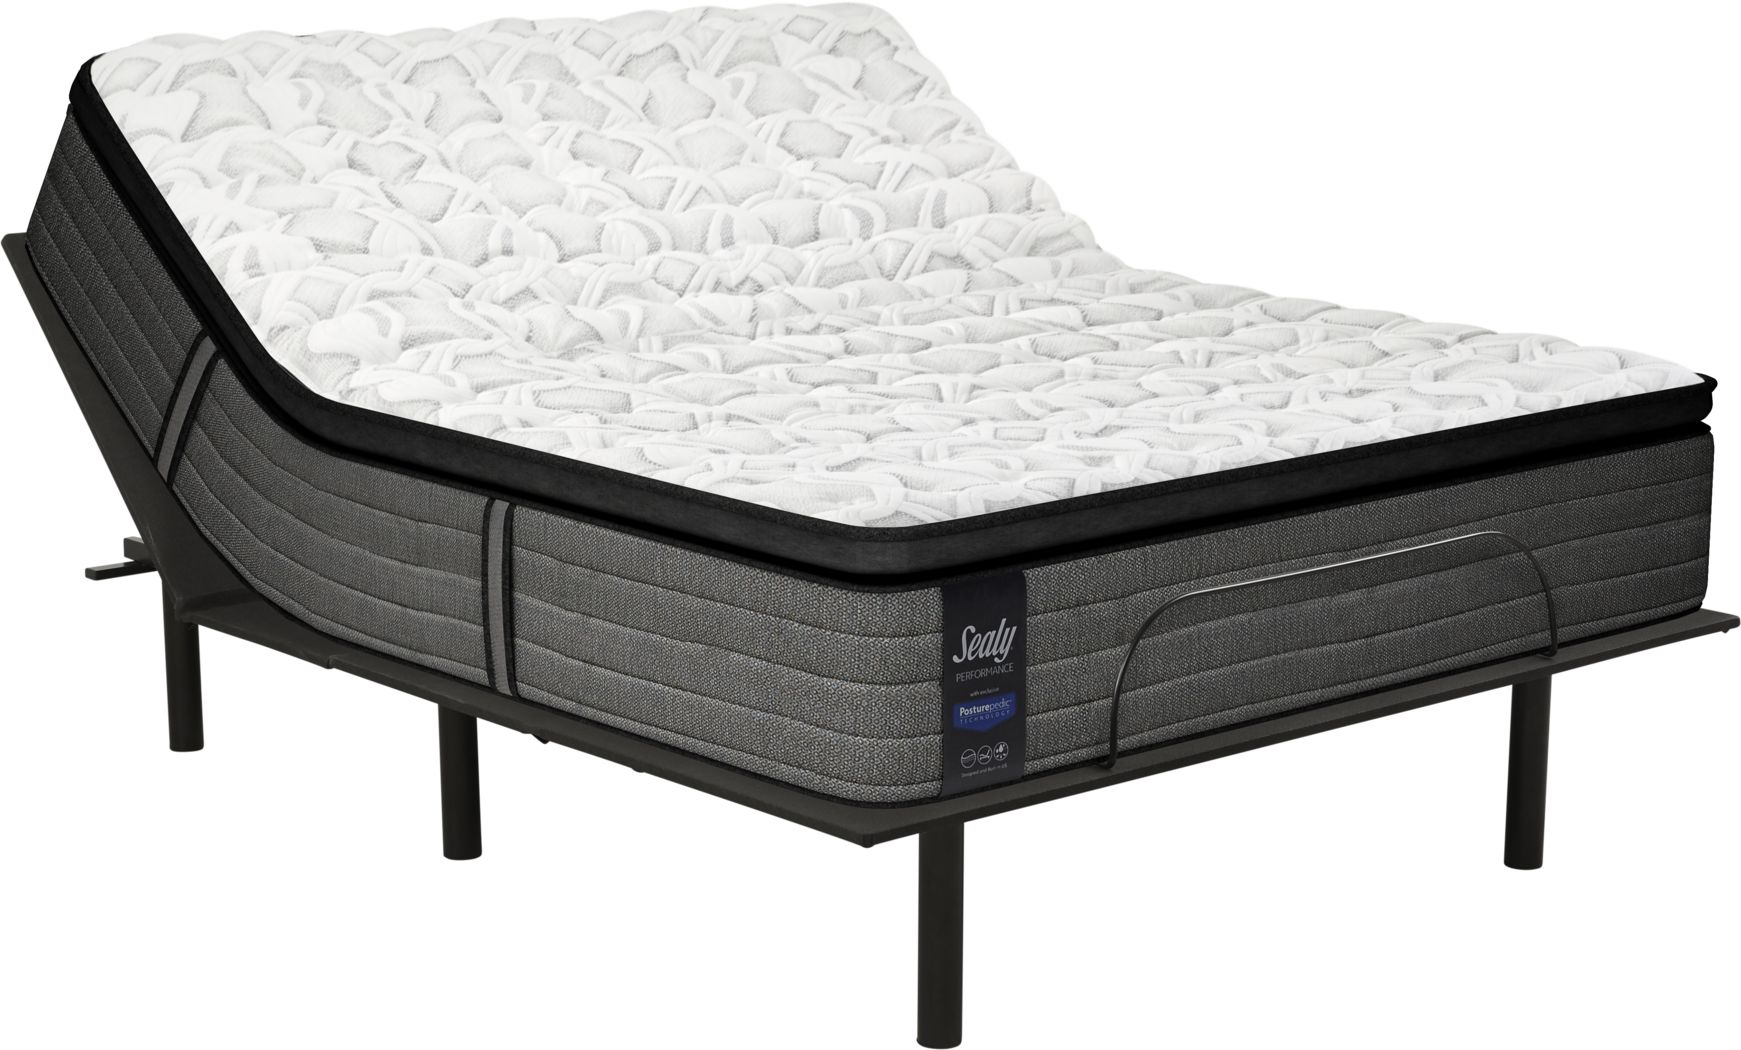 sealy performance paradise cove mattress reviews